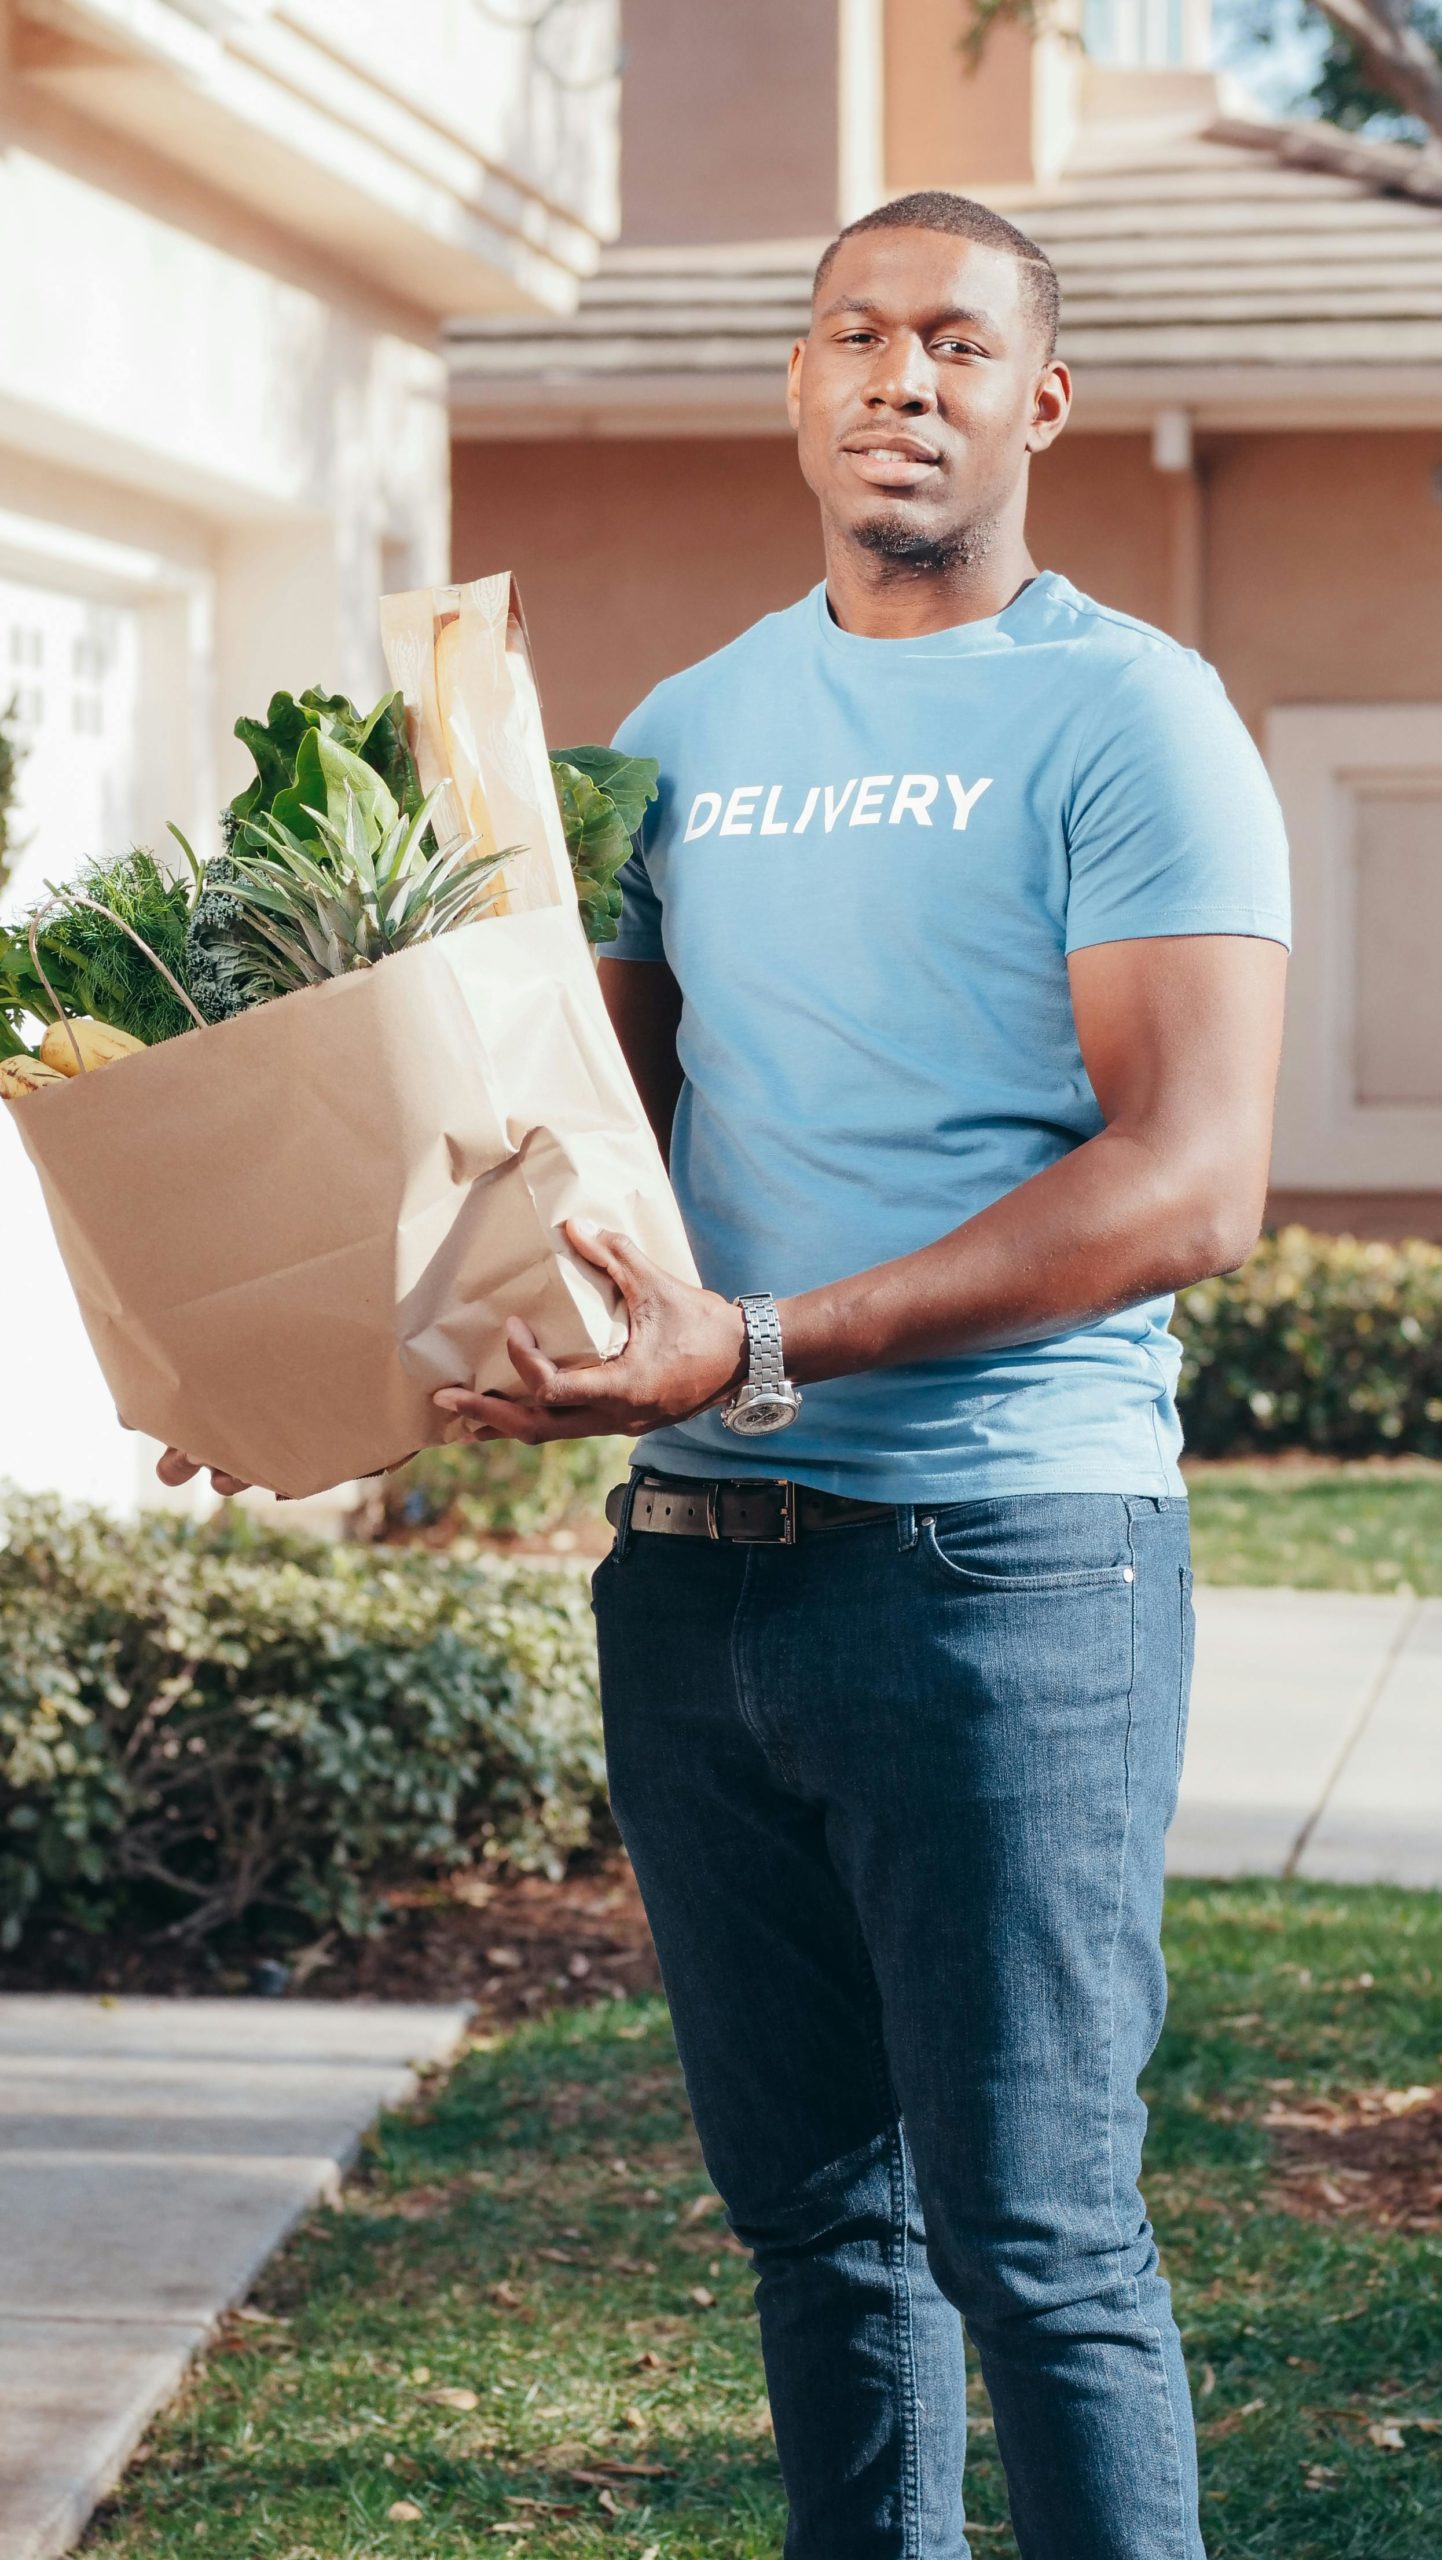 New Home with Grocery Delivery Services